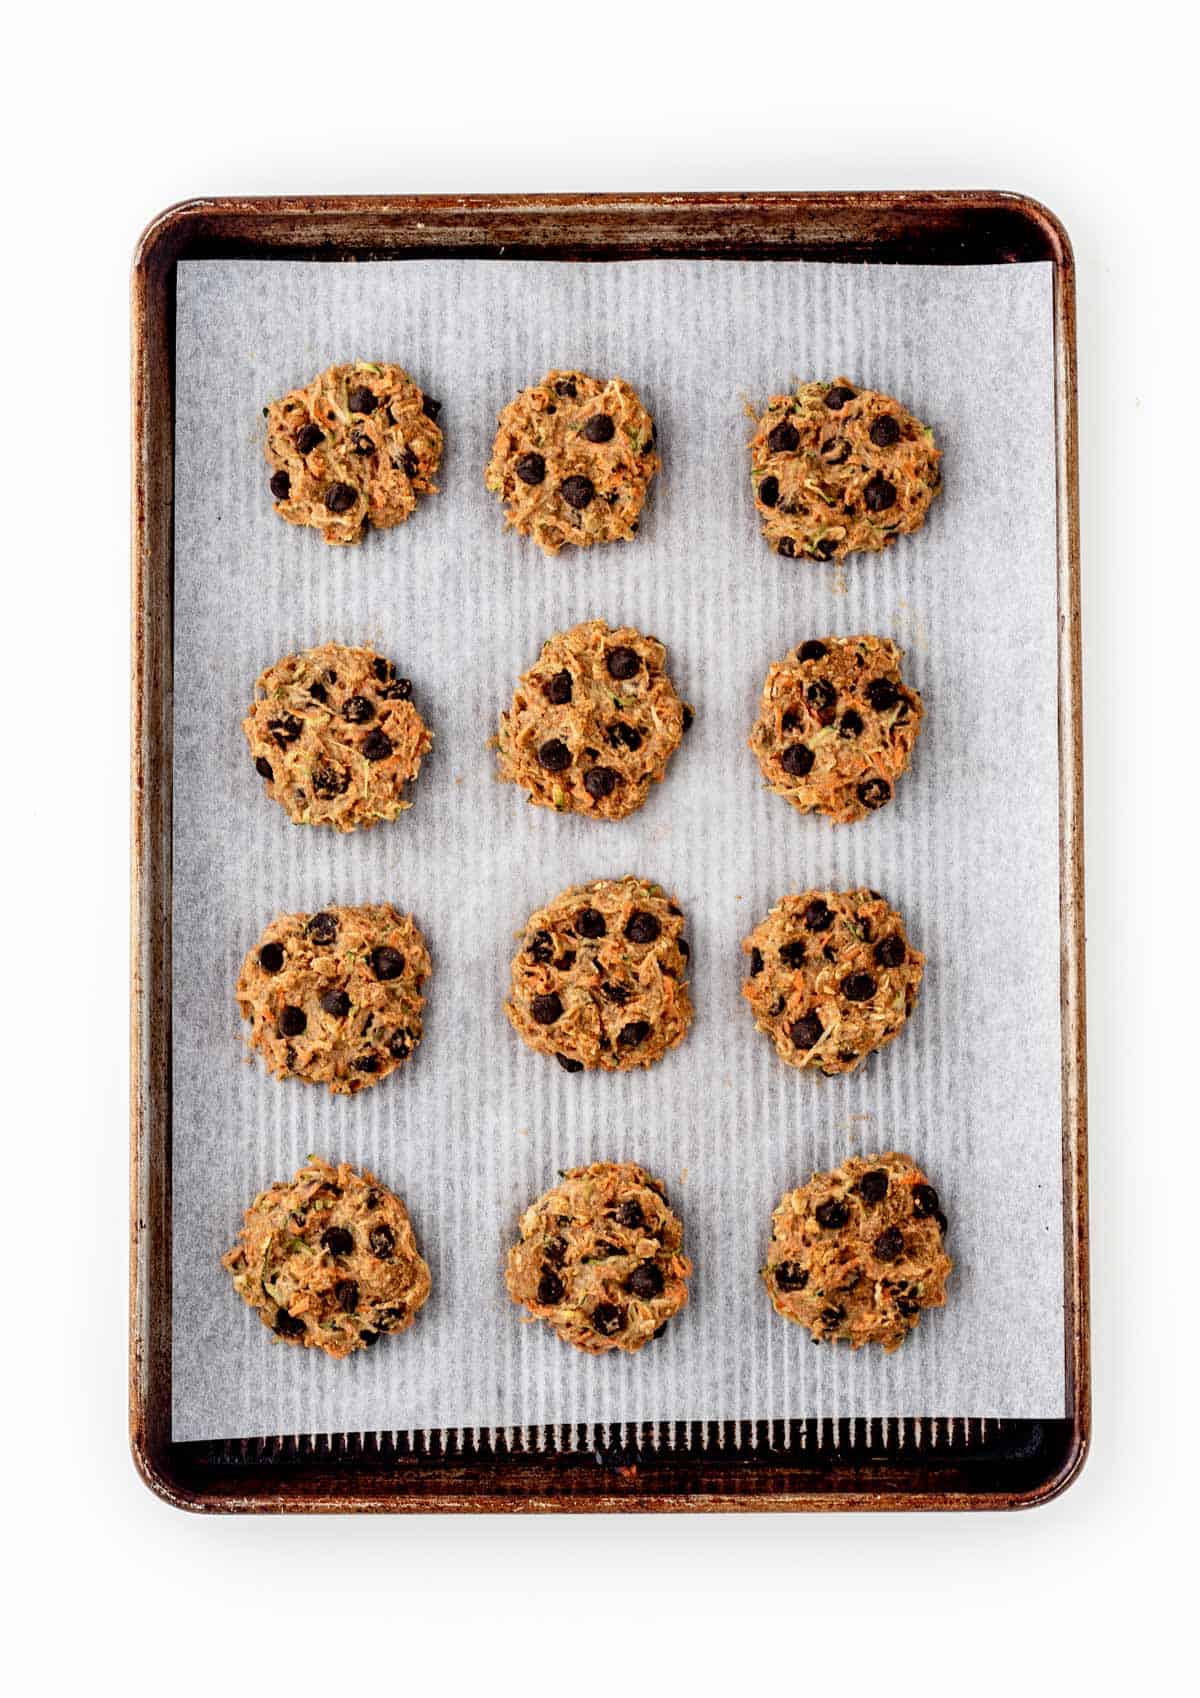 Baked cookies with hidden veggies on a baking sheet lined with parchment paper.